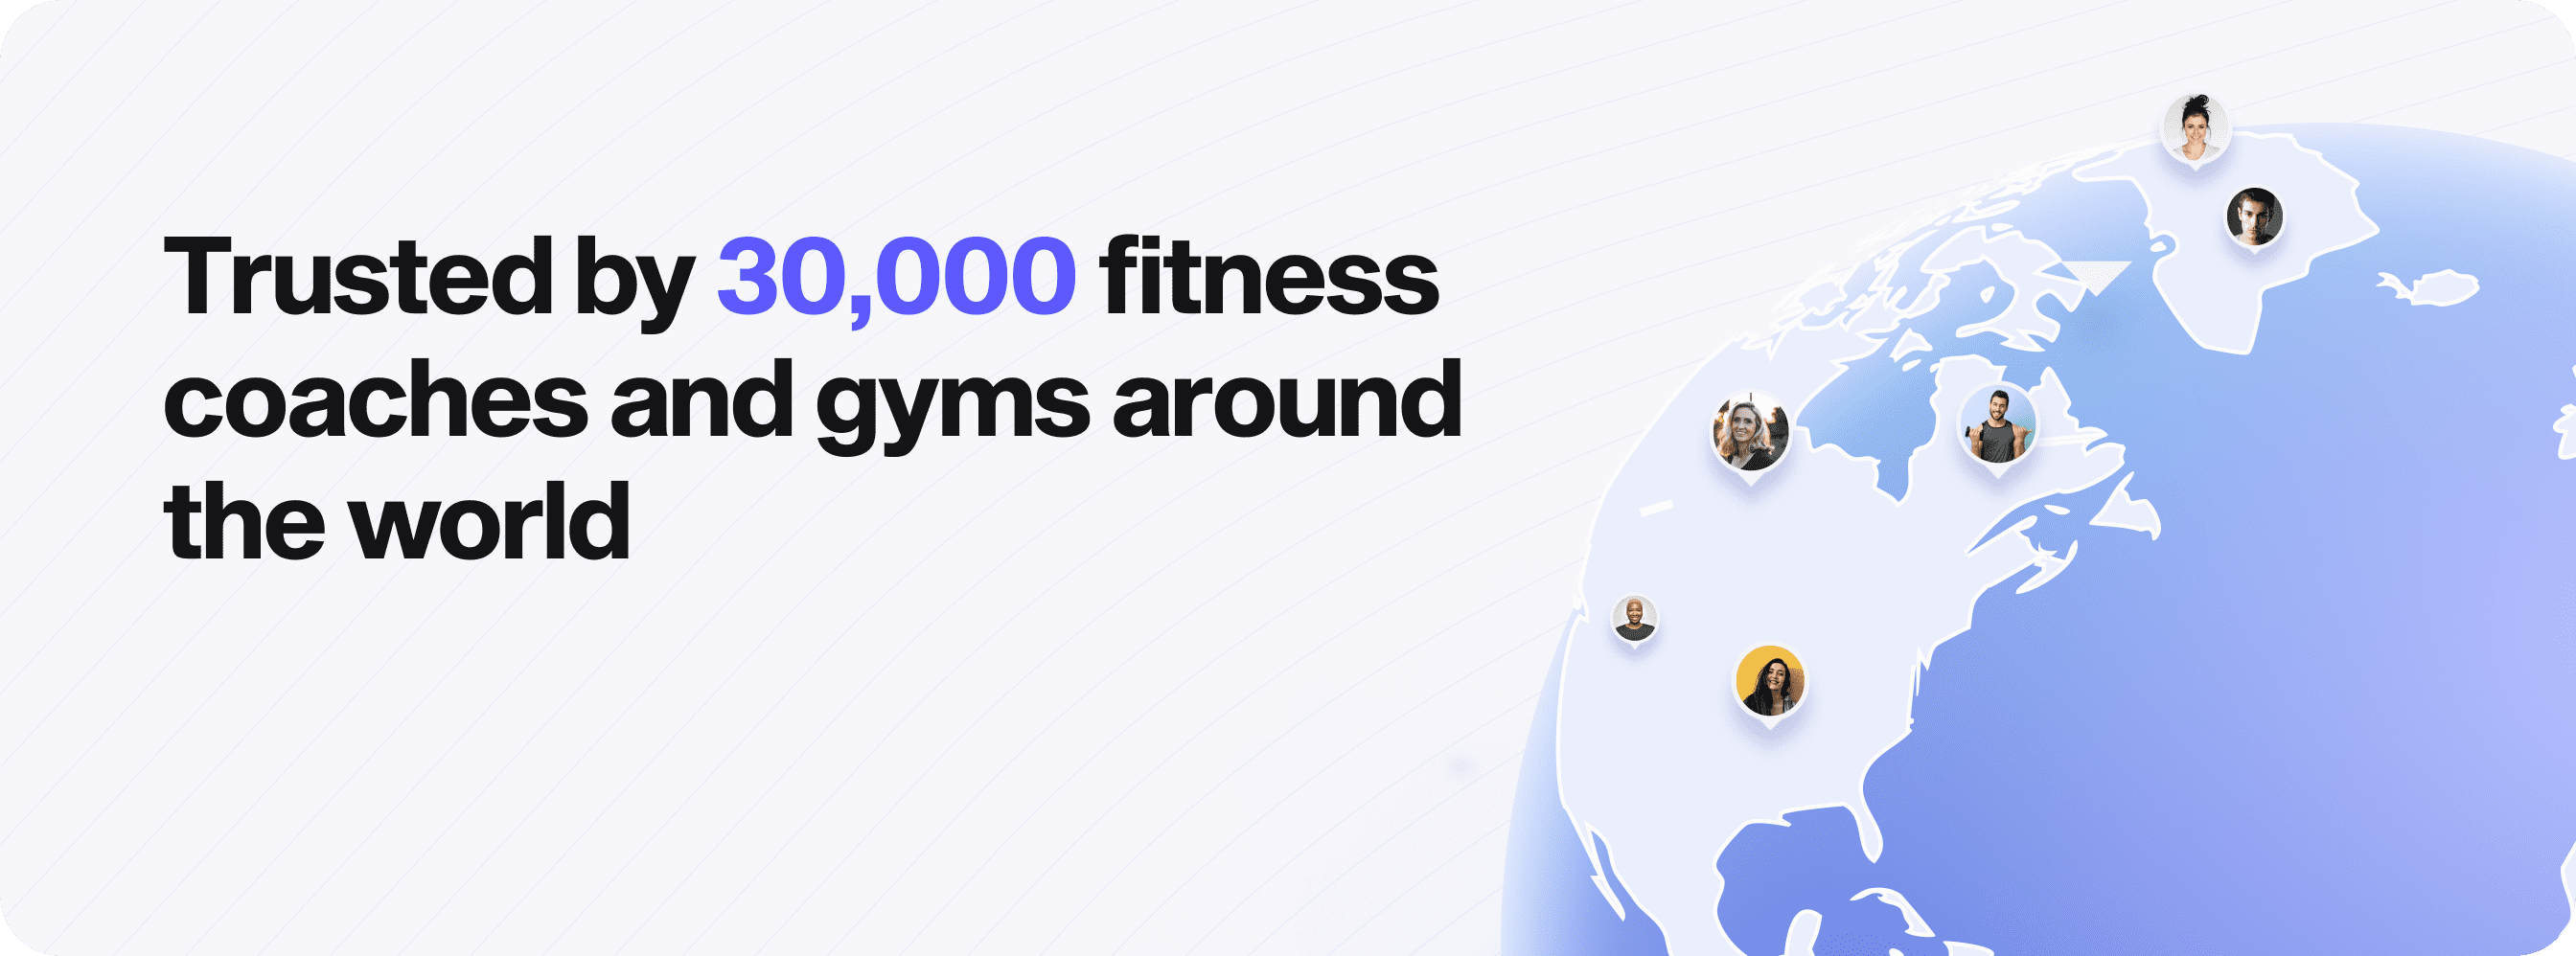 Trusted by 30,000 fitness coaches and gyms around the world